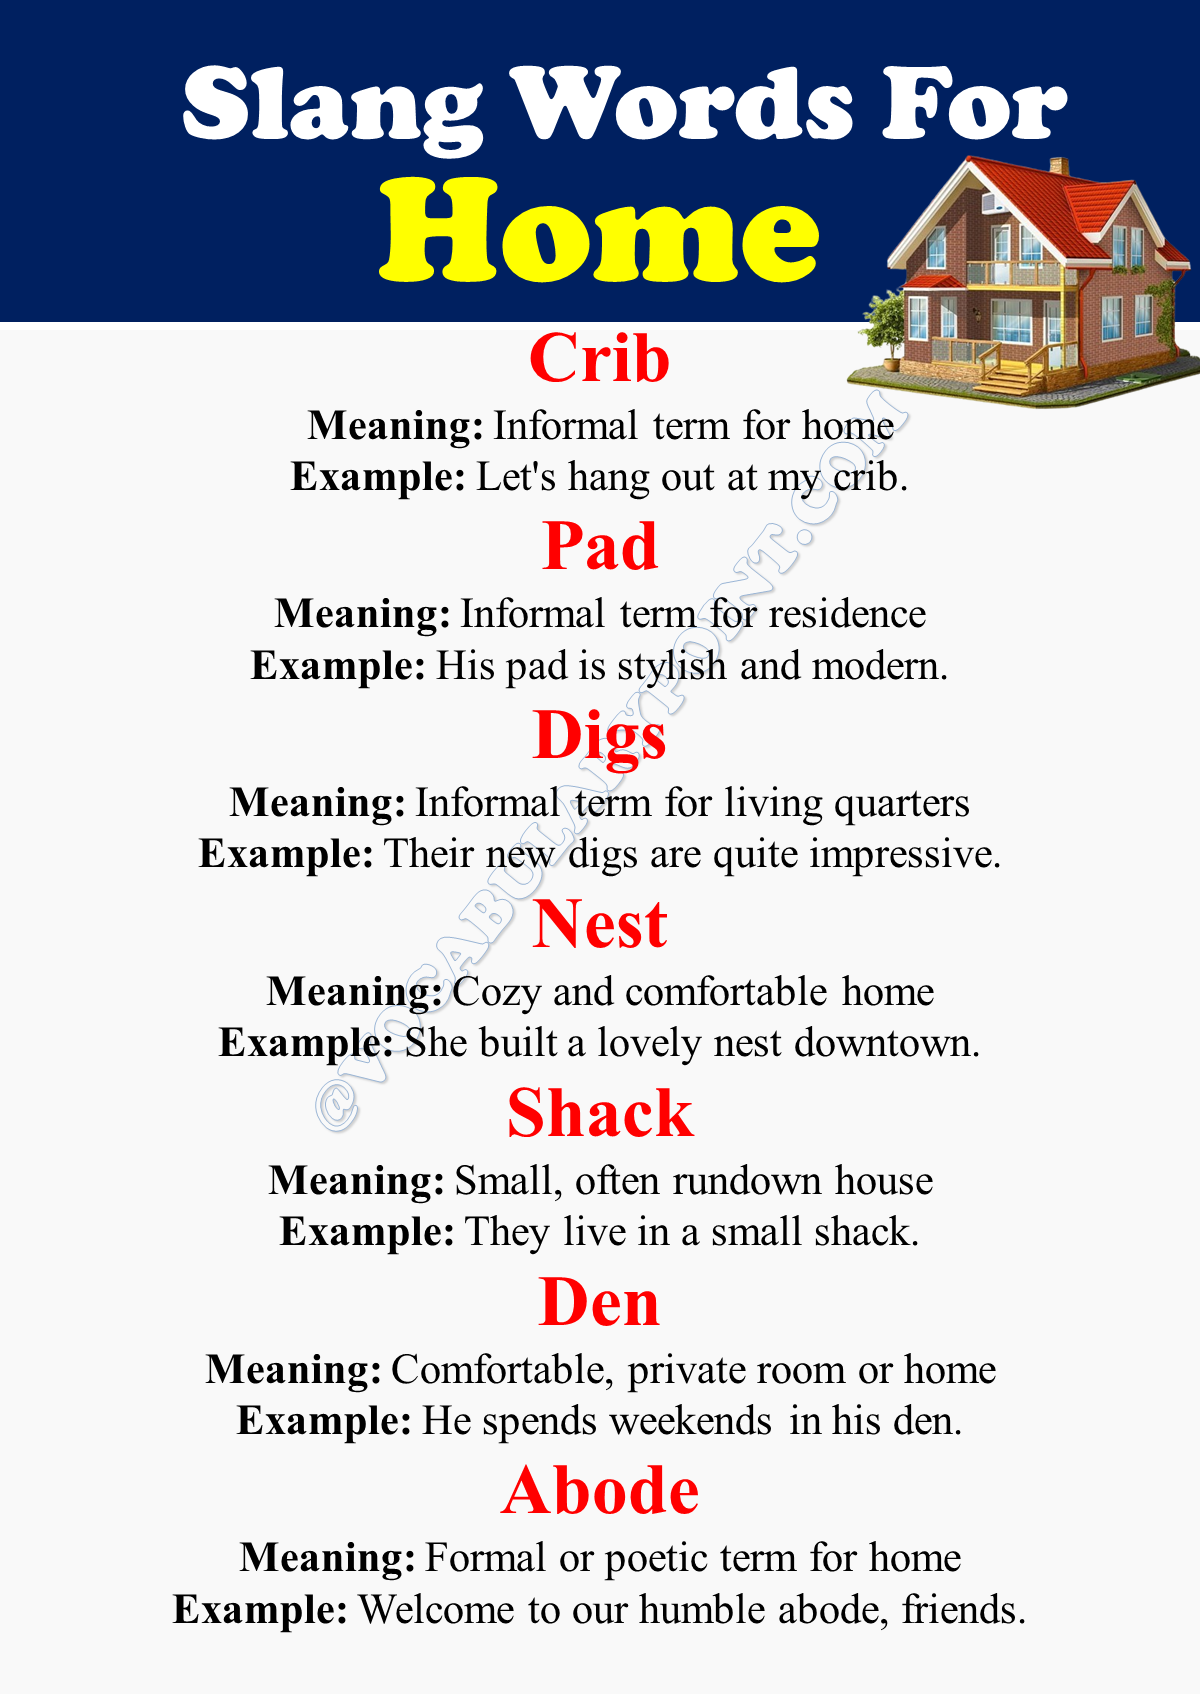 Slang Words For Home